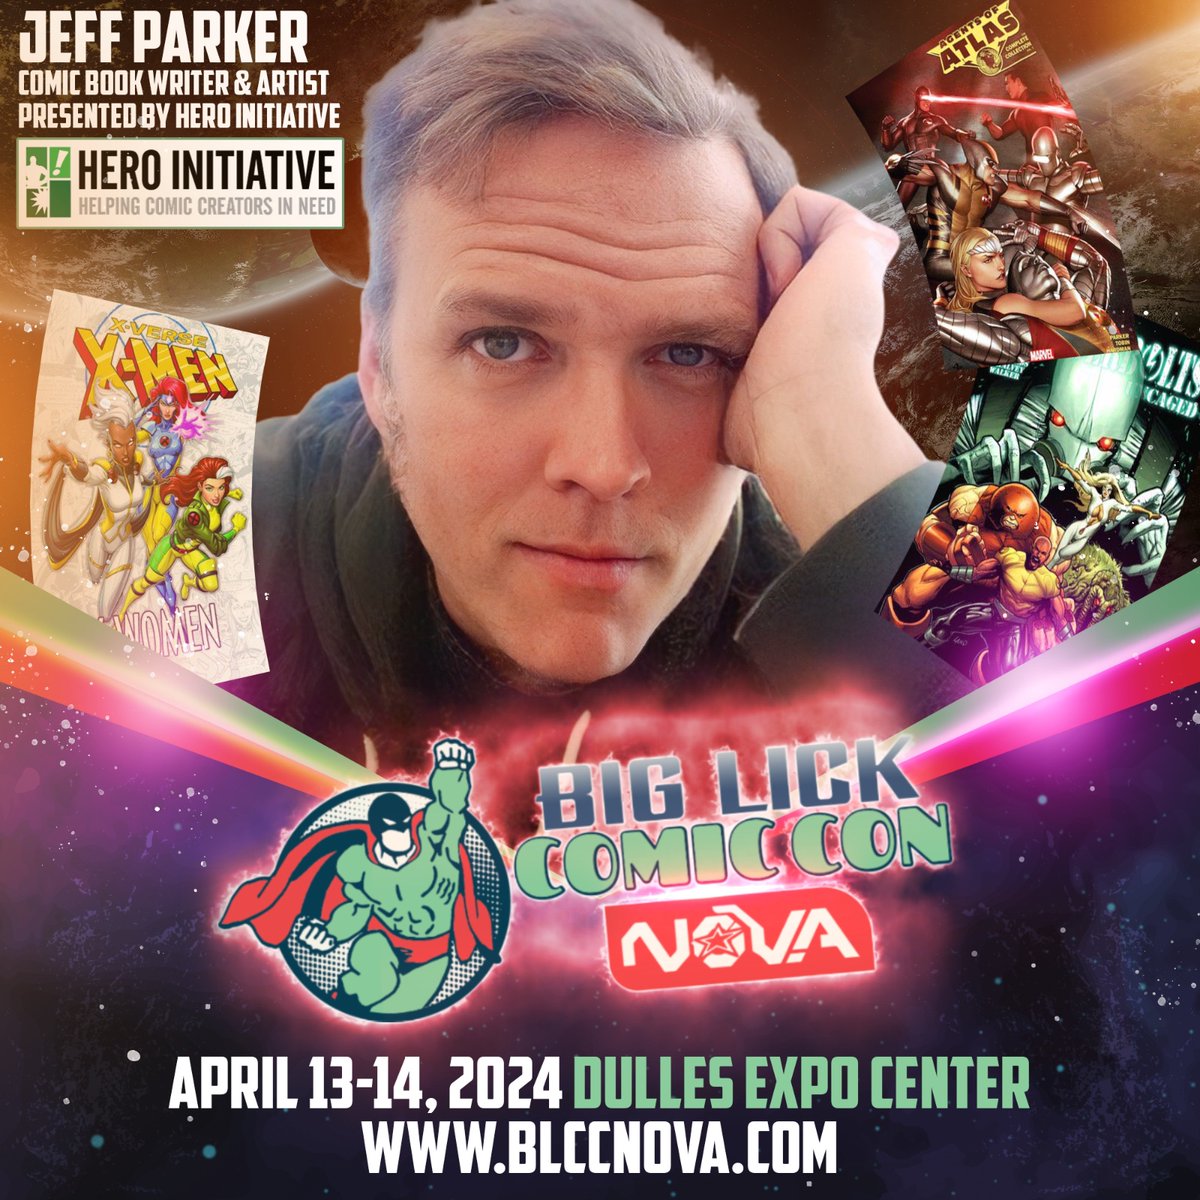 In just 26 days! Teen idol @jeffparker will be @biglickcomiccon NoVa with Hero Initiative April 13-14 in the Washington DC area! Get you there! Tix and info: blccnova.com